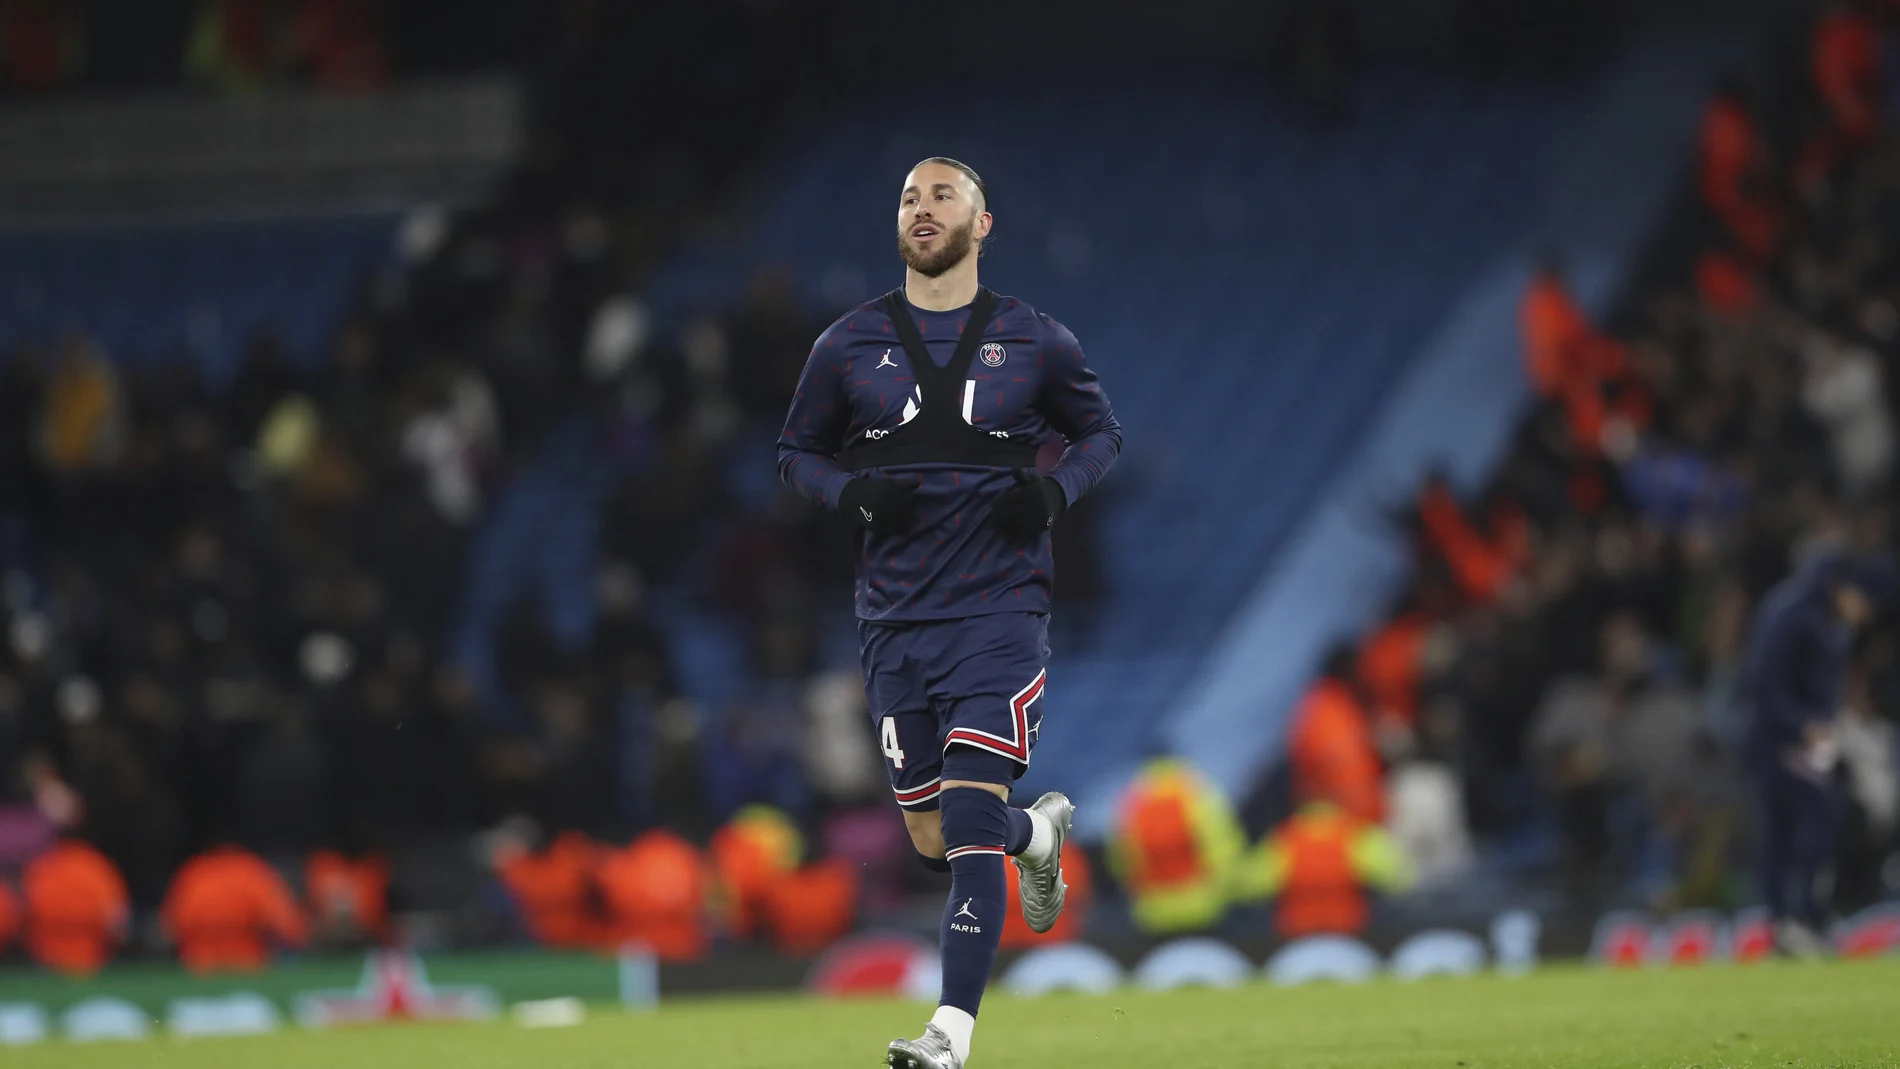 PSG substitute Sergio Ramos, who did not play, warms down after the Champions League group A soccer match between Manchester City and Paris Saint-Germain at the Etihad Stadium in Manchester, England, Wednesday, Nov. 24, 2021. (AP Photo/Scott Heppell)